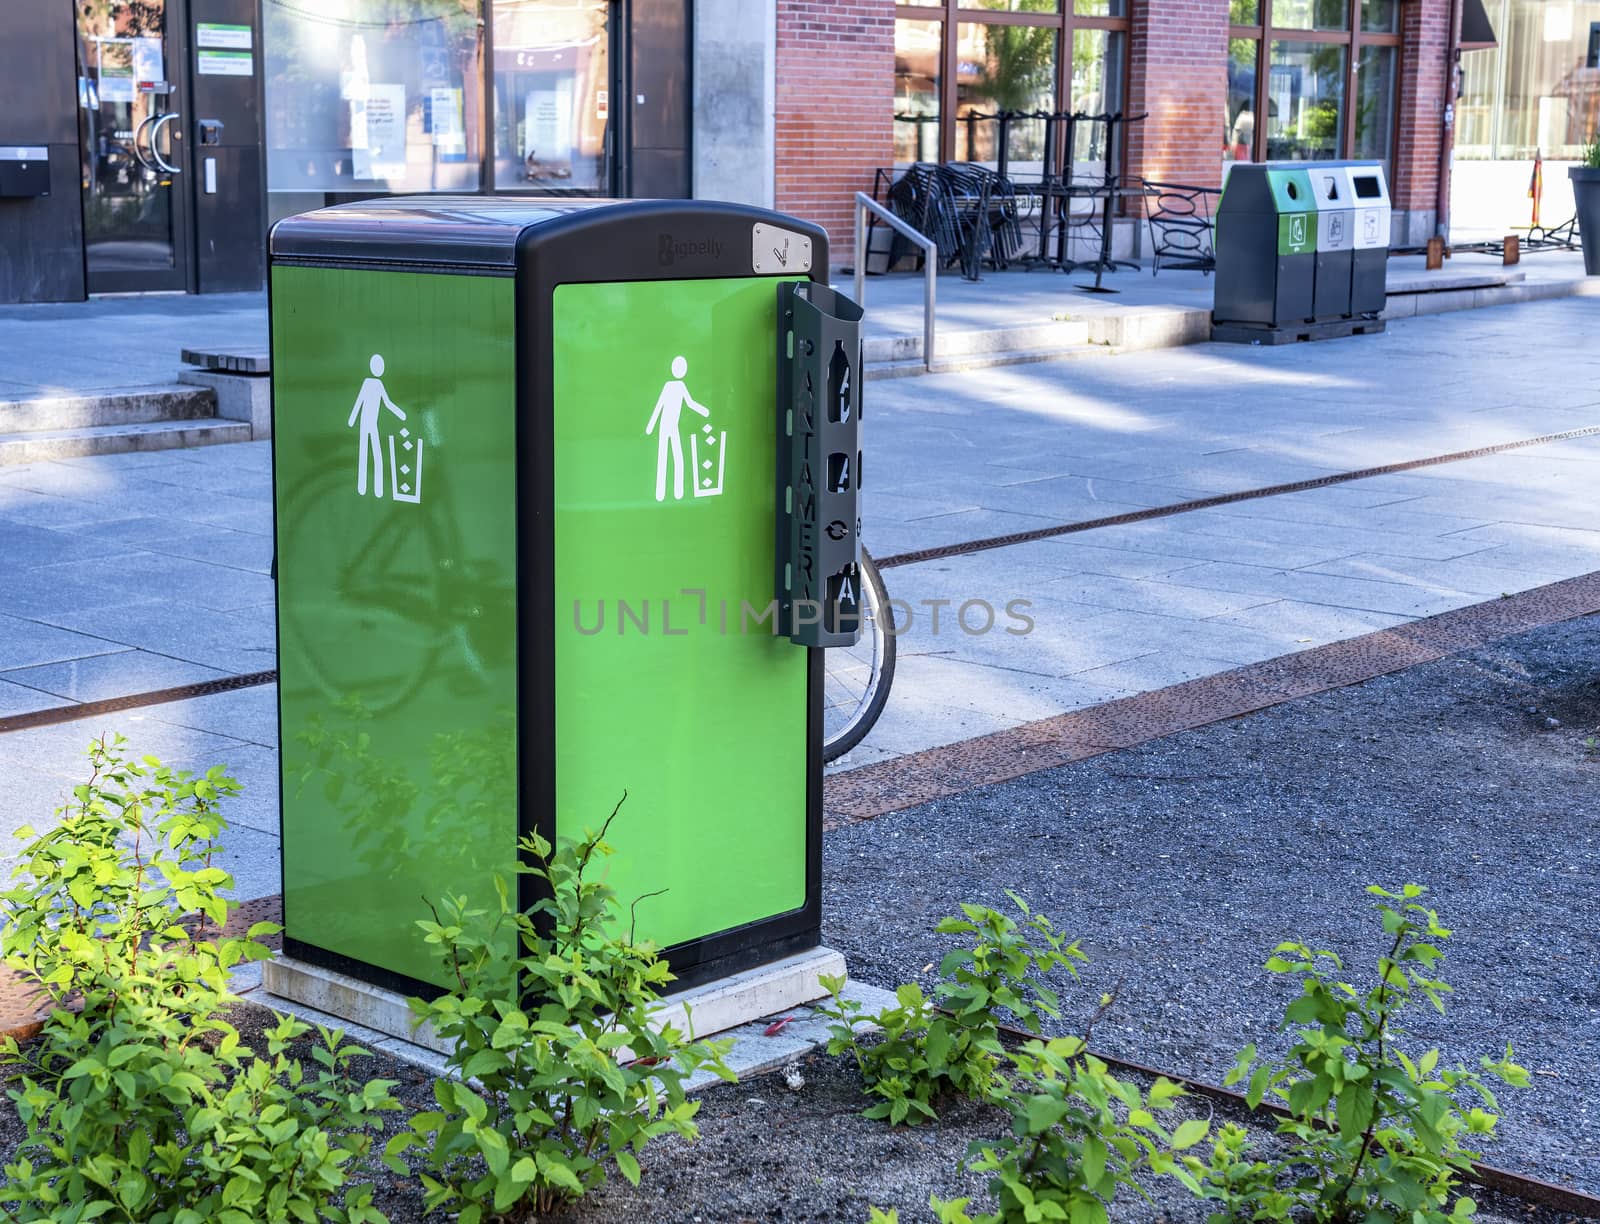 UMEA, SWEDEN - JUNE 10, 2020: Fresh nice looking green bin with black top, easy cans recycling for tourists and locals walking on street, summer time, central part of Umea city, Vasterbotten county by skydreamliner